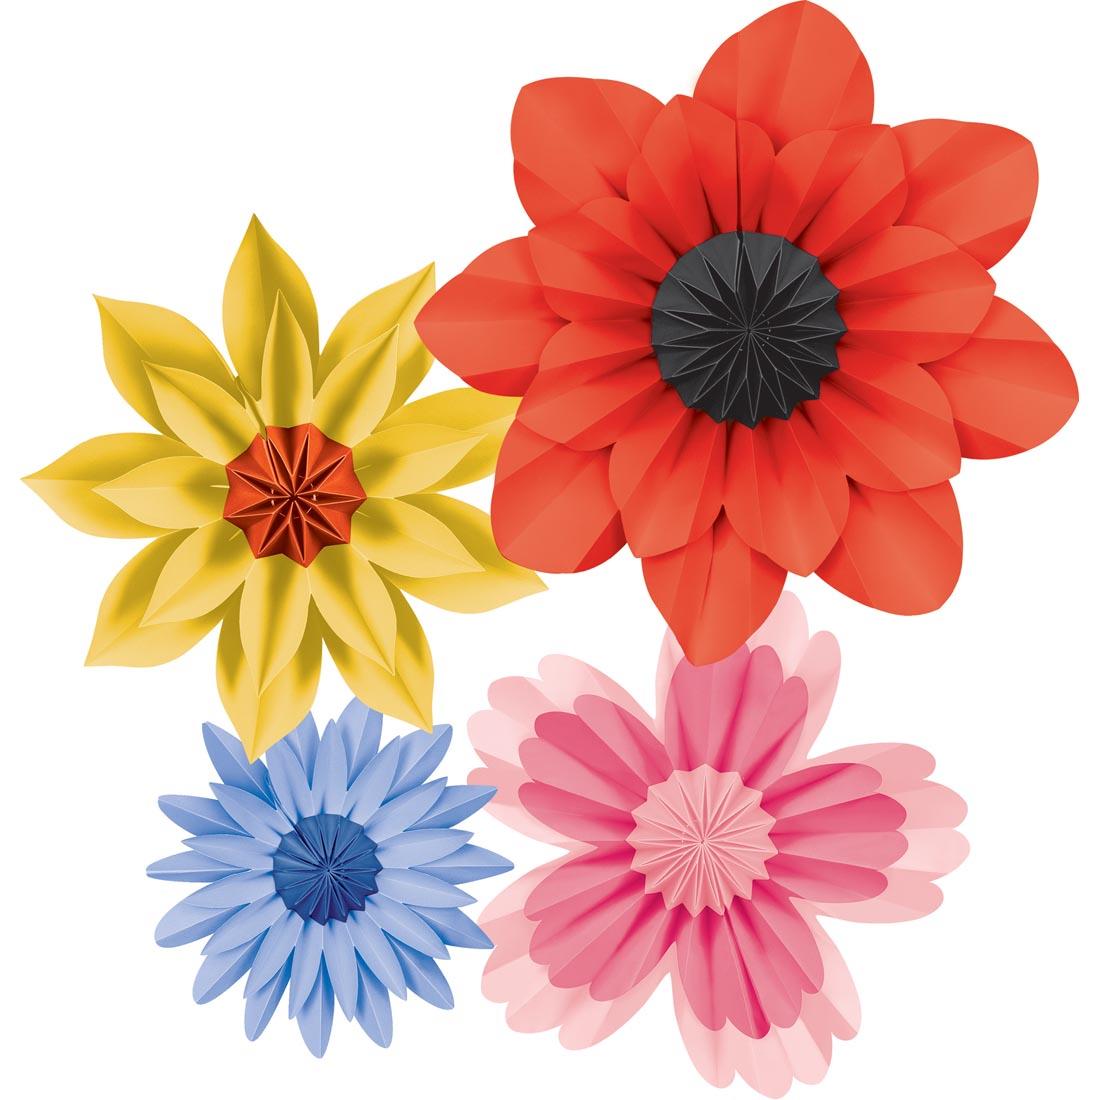 Paper Flowers from the Wildflowers collection by Teacher Created Resources